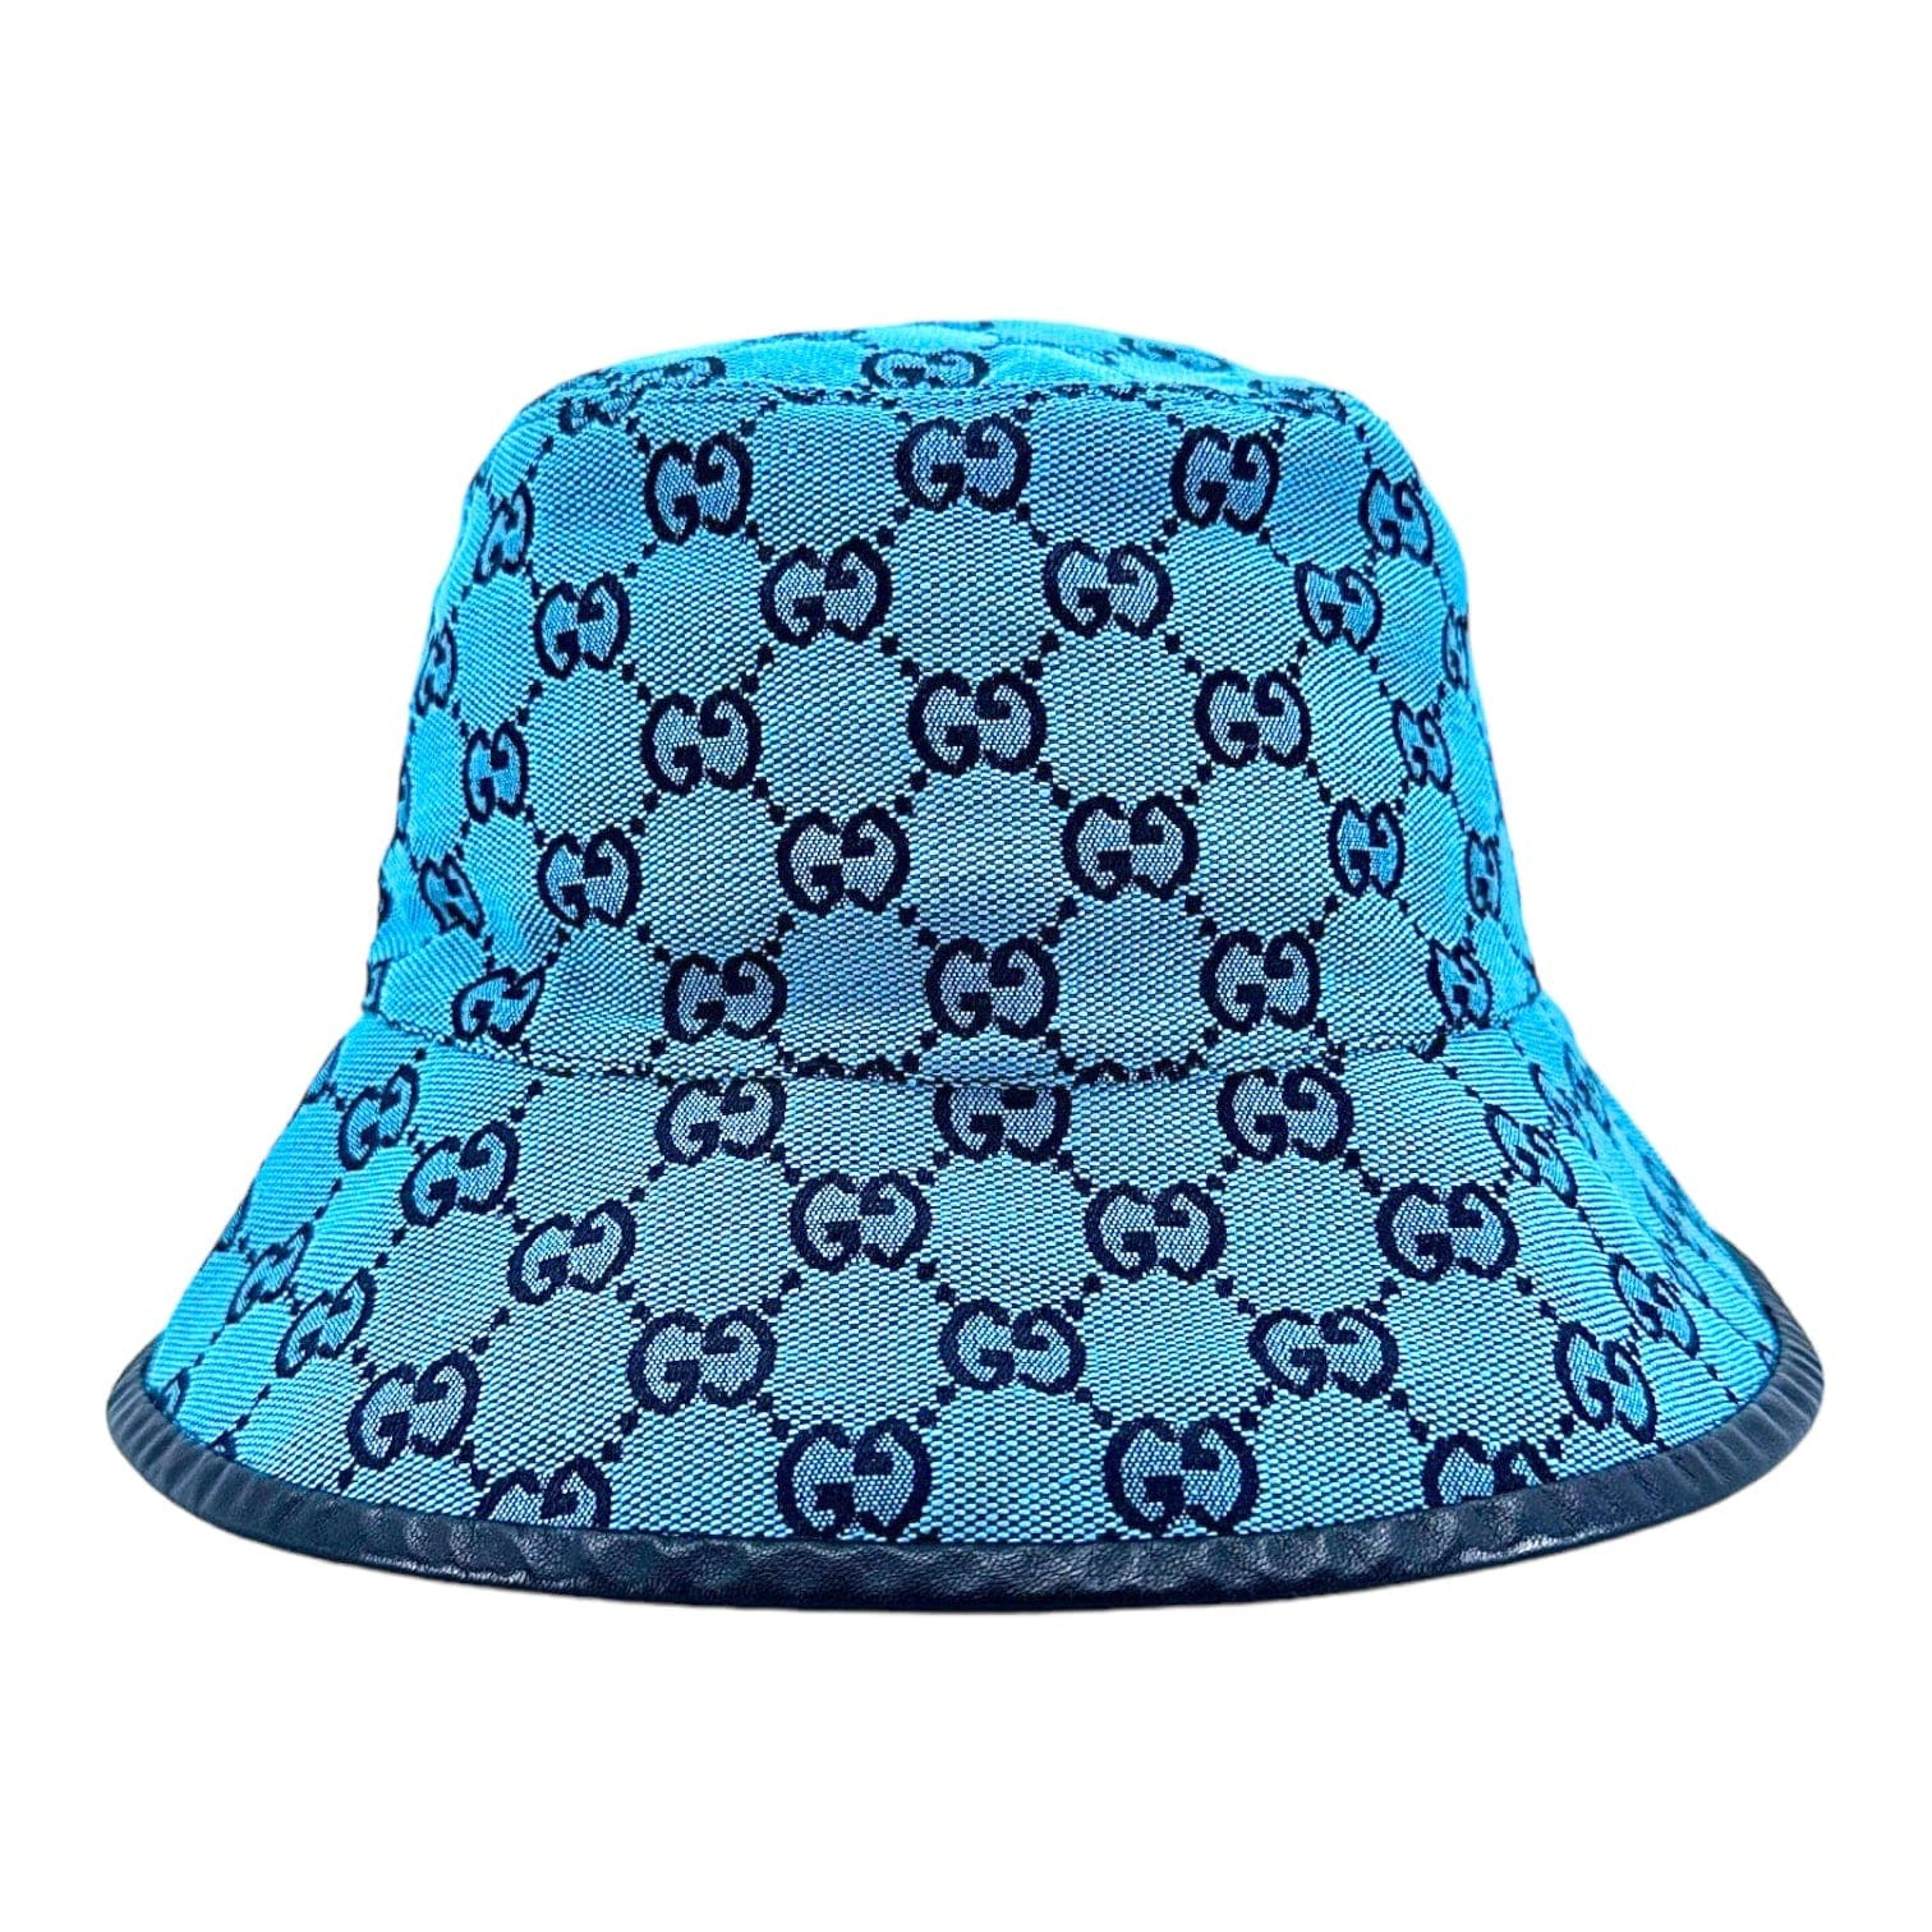 Alternate View 3 of Gucci GG Multicolor Canvas Bucket Hat Blue Black Pre-Owned